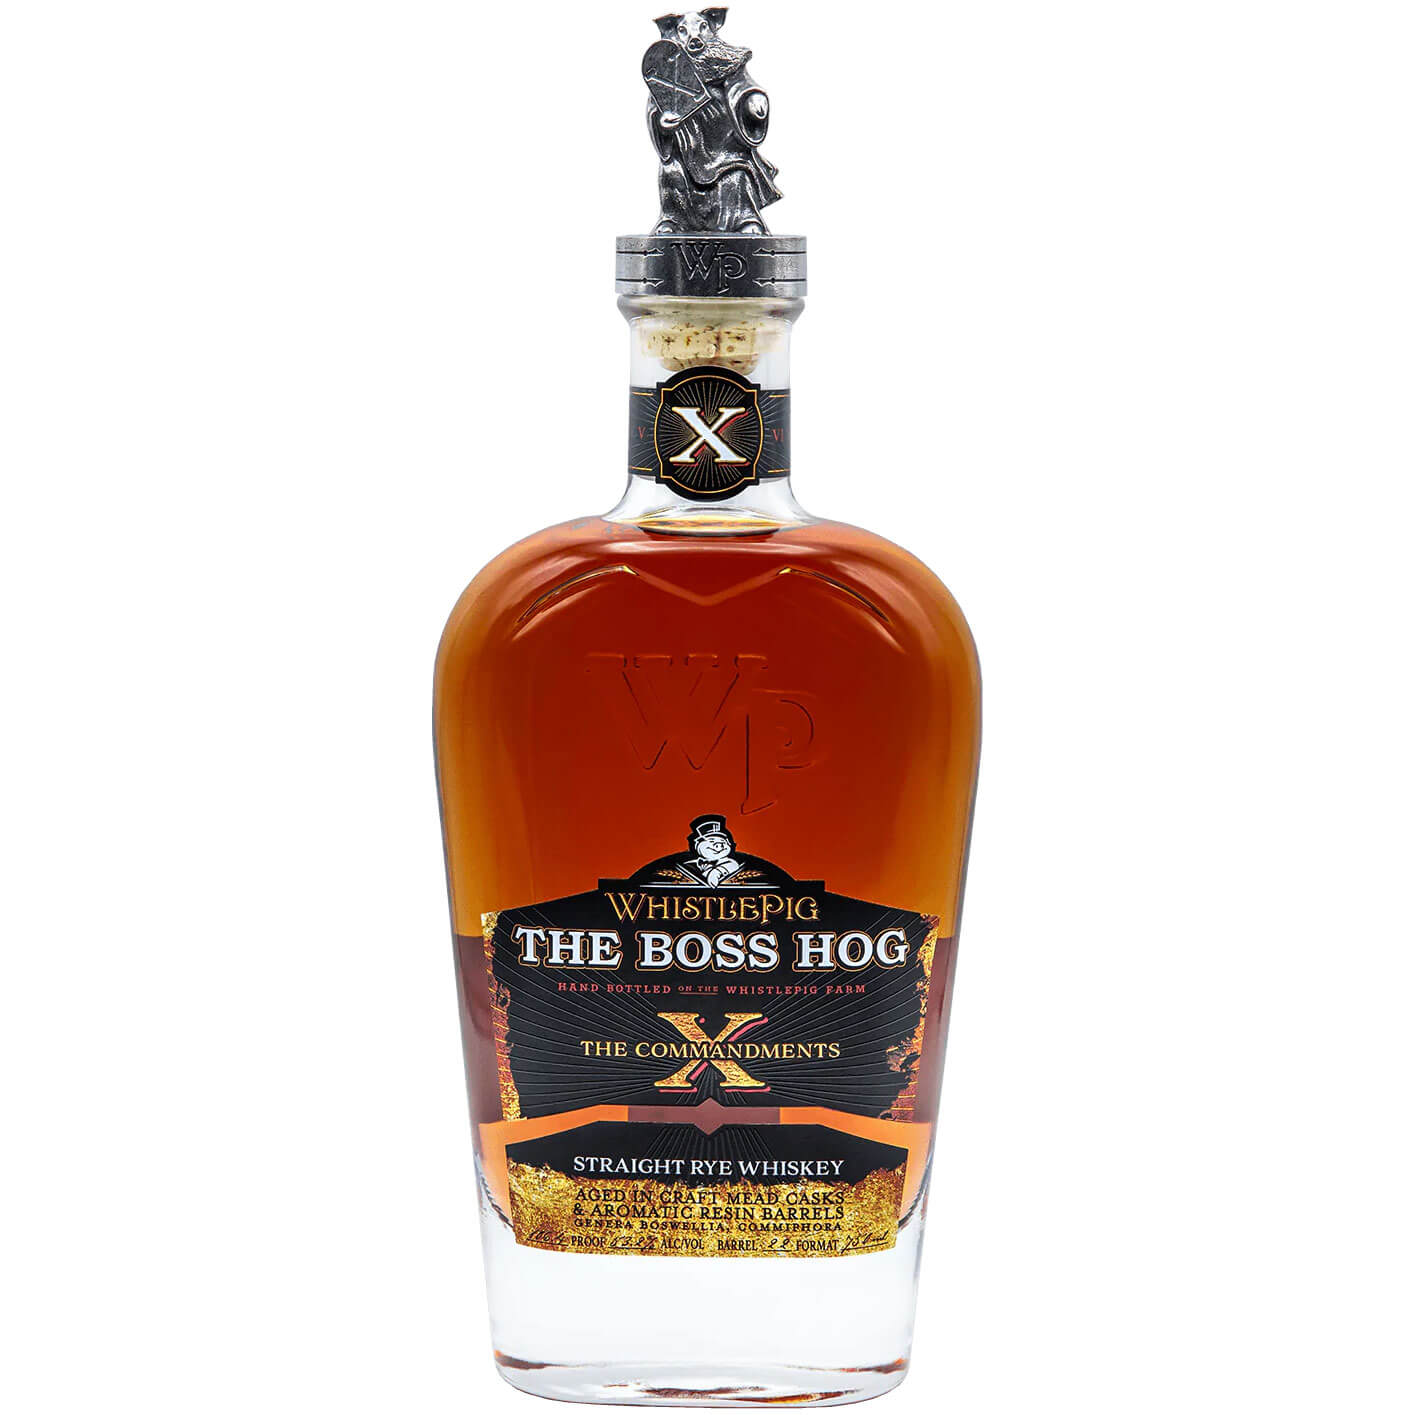 WhistlePig The Boss Hog X "The Commandments" release details Lost Cargo